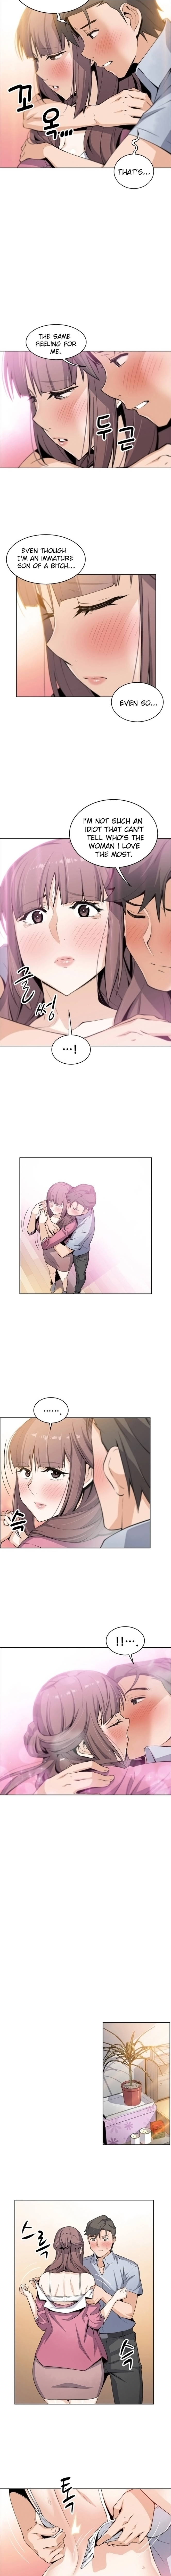 Housekeeper Manhwa - Chapter 23 Page 8